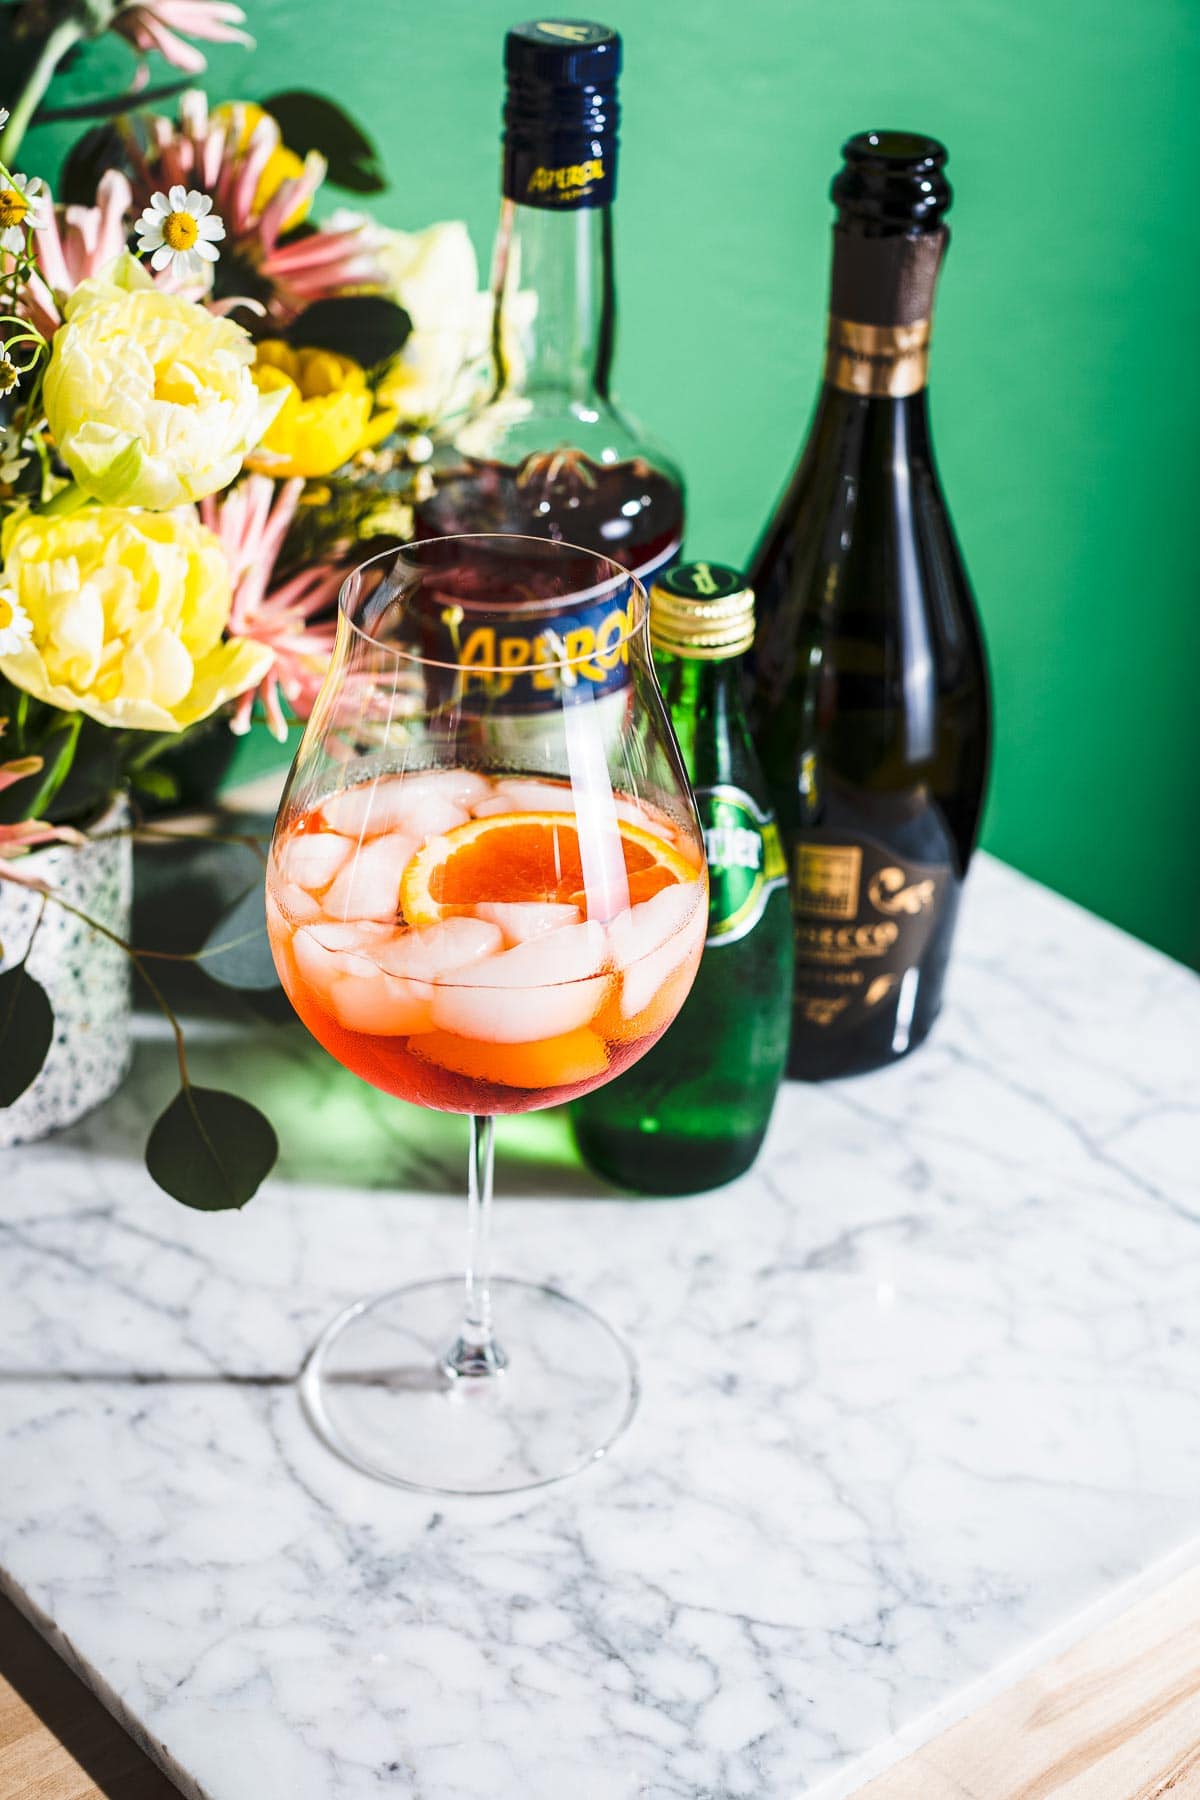 Refresh Yourself With This Great Aperol Spritz